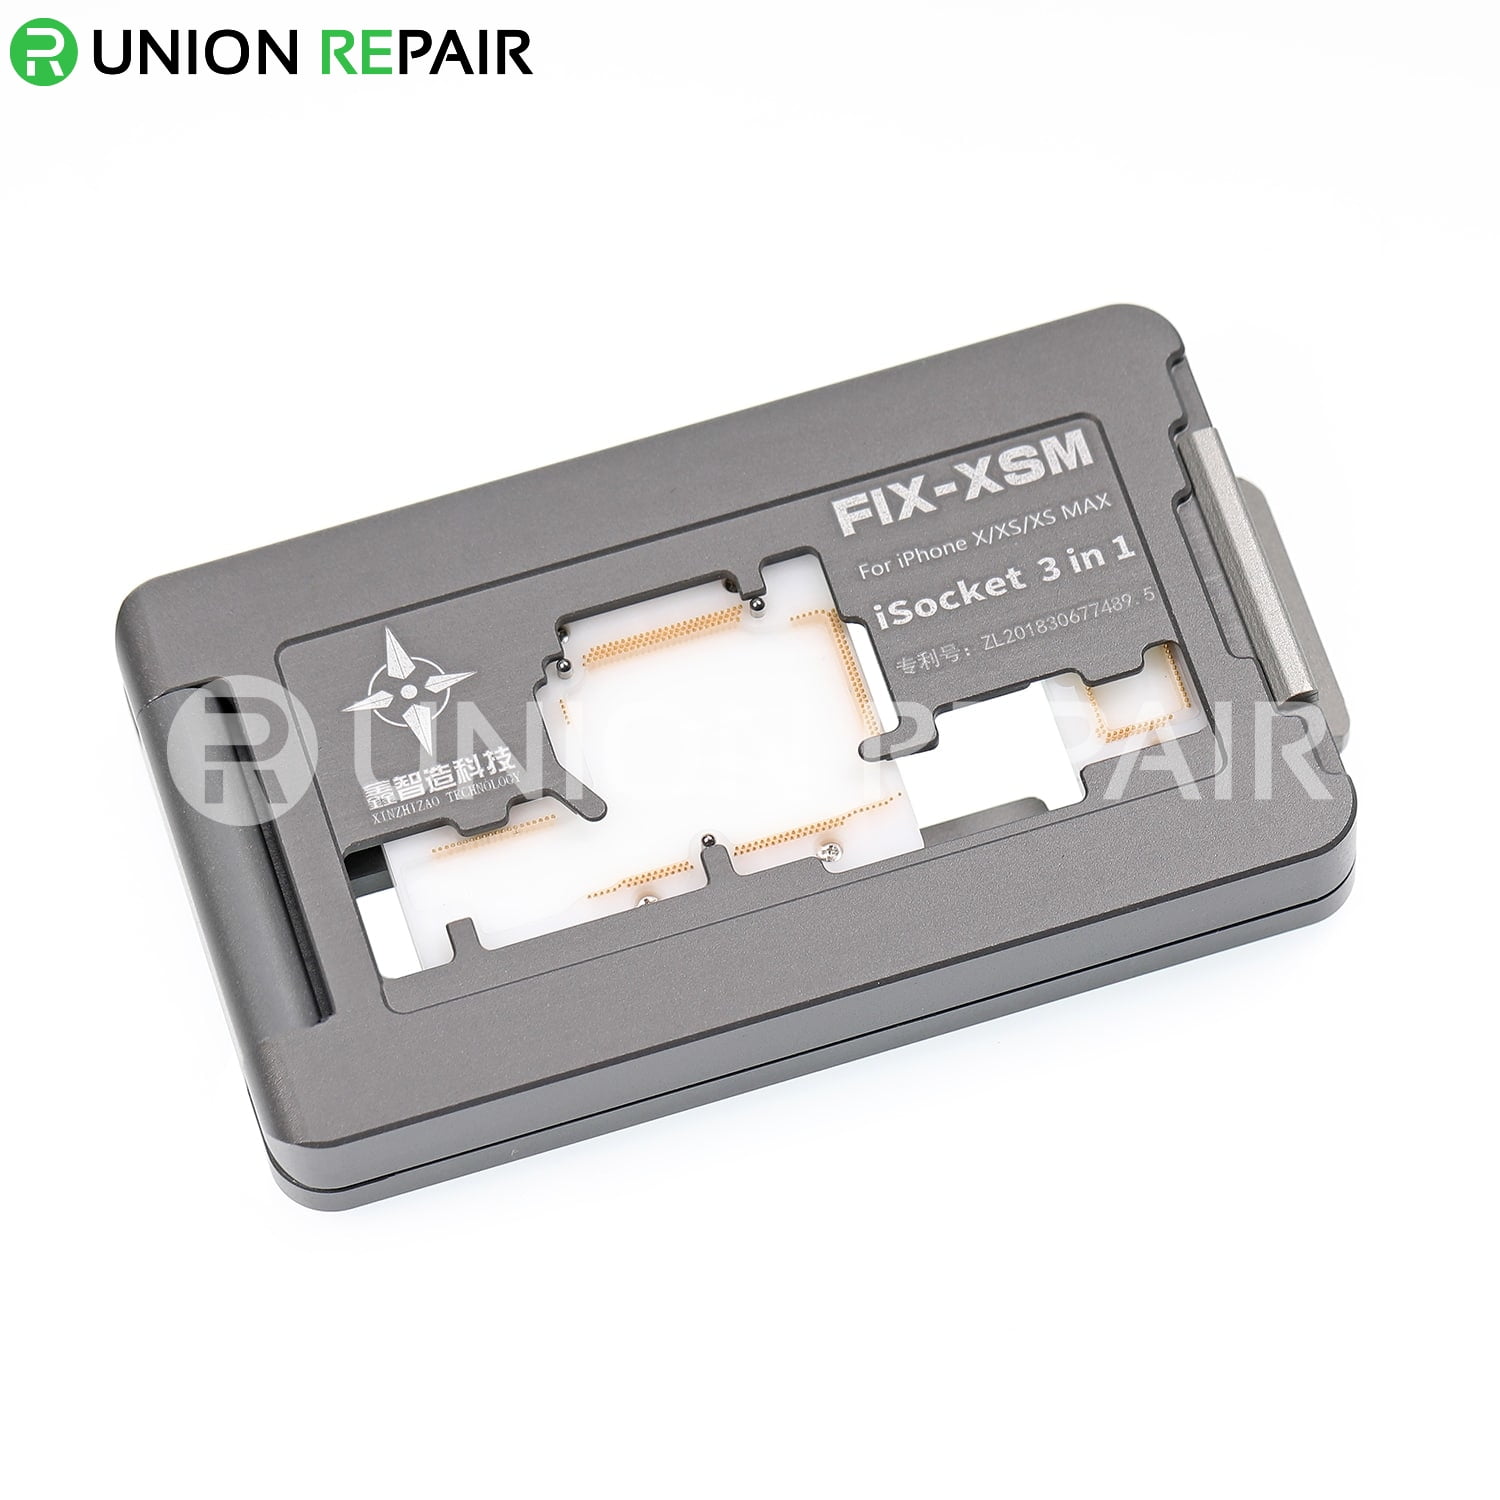 FIX-XS ISOCKET 2 IN1 LAYER LOGIC MOTHERBOARD TEST FIXTURE FOR IPHONE XS/XSMAX PCB REPAIR